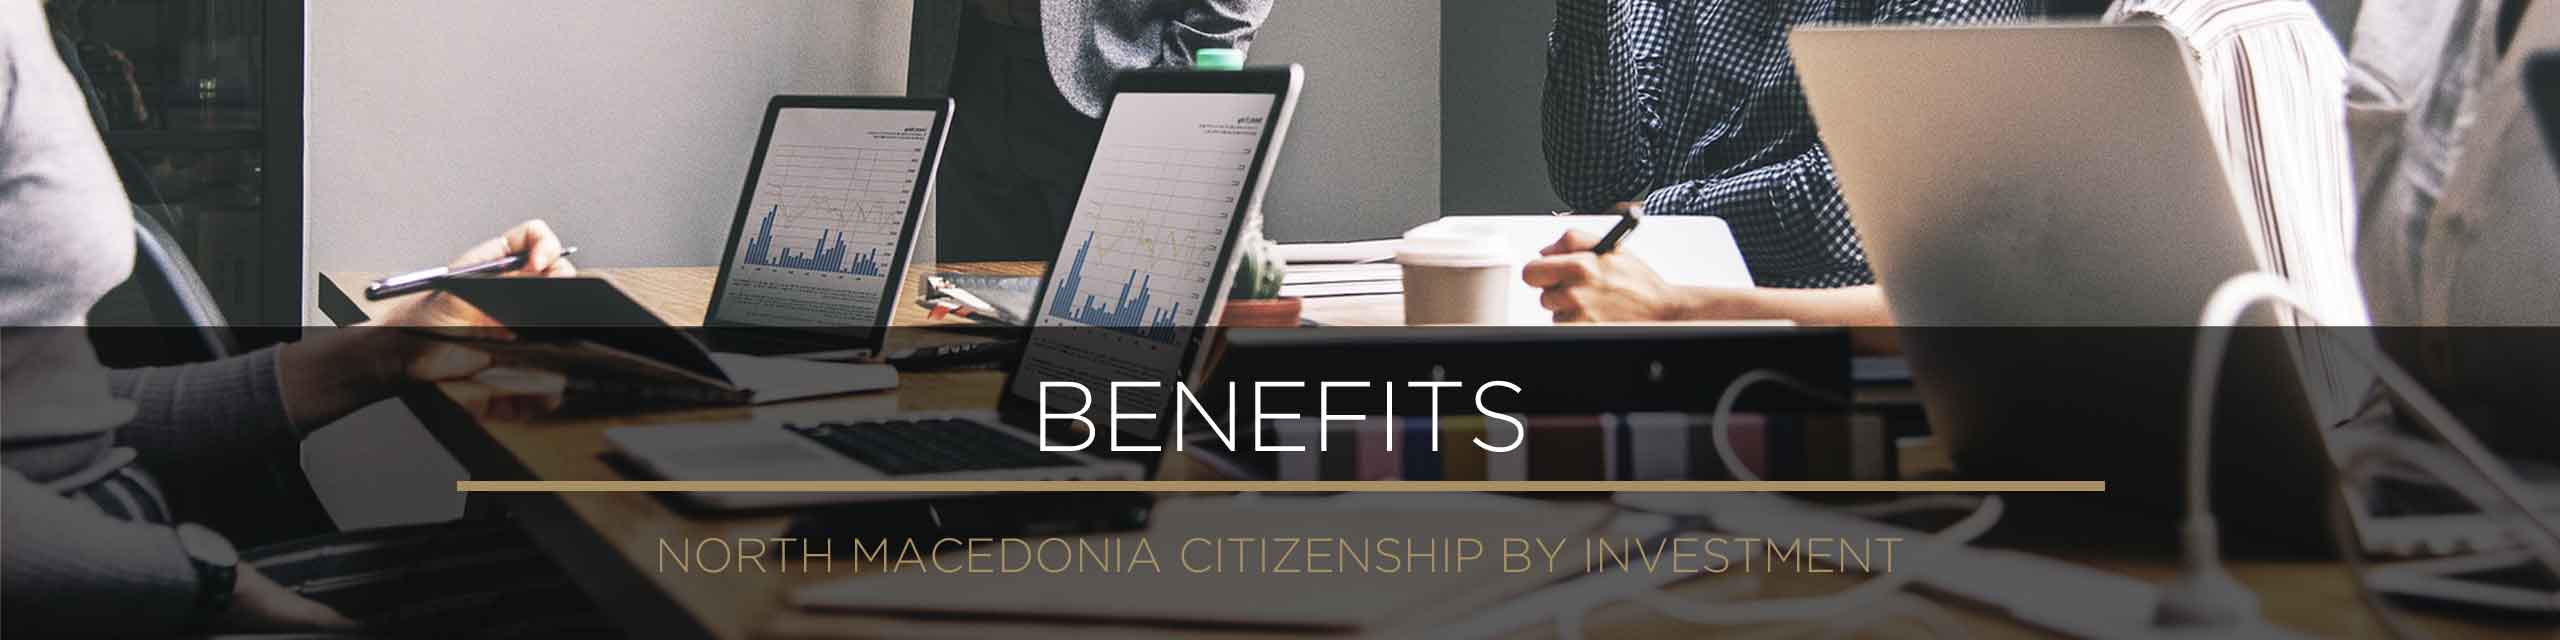 North Macedonia - What is Citizenship? - Benefits